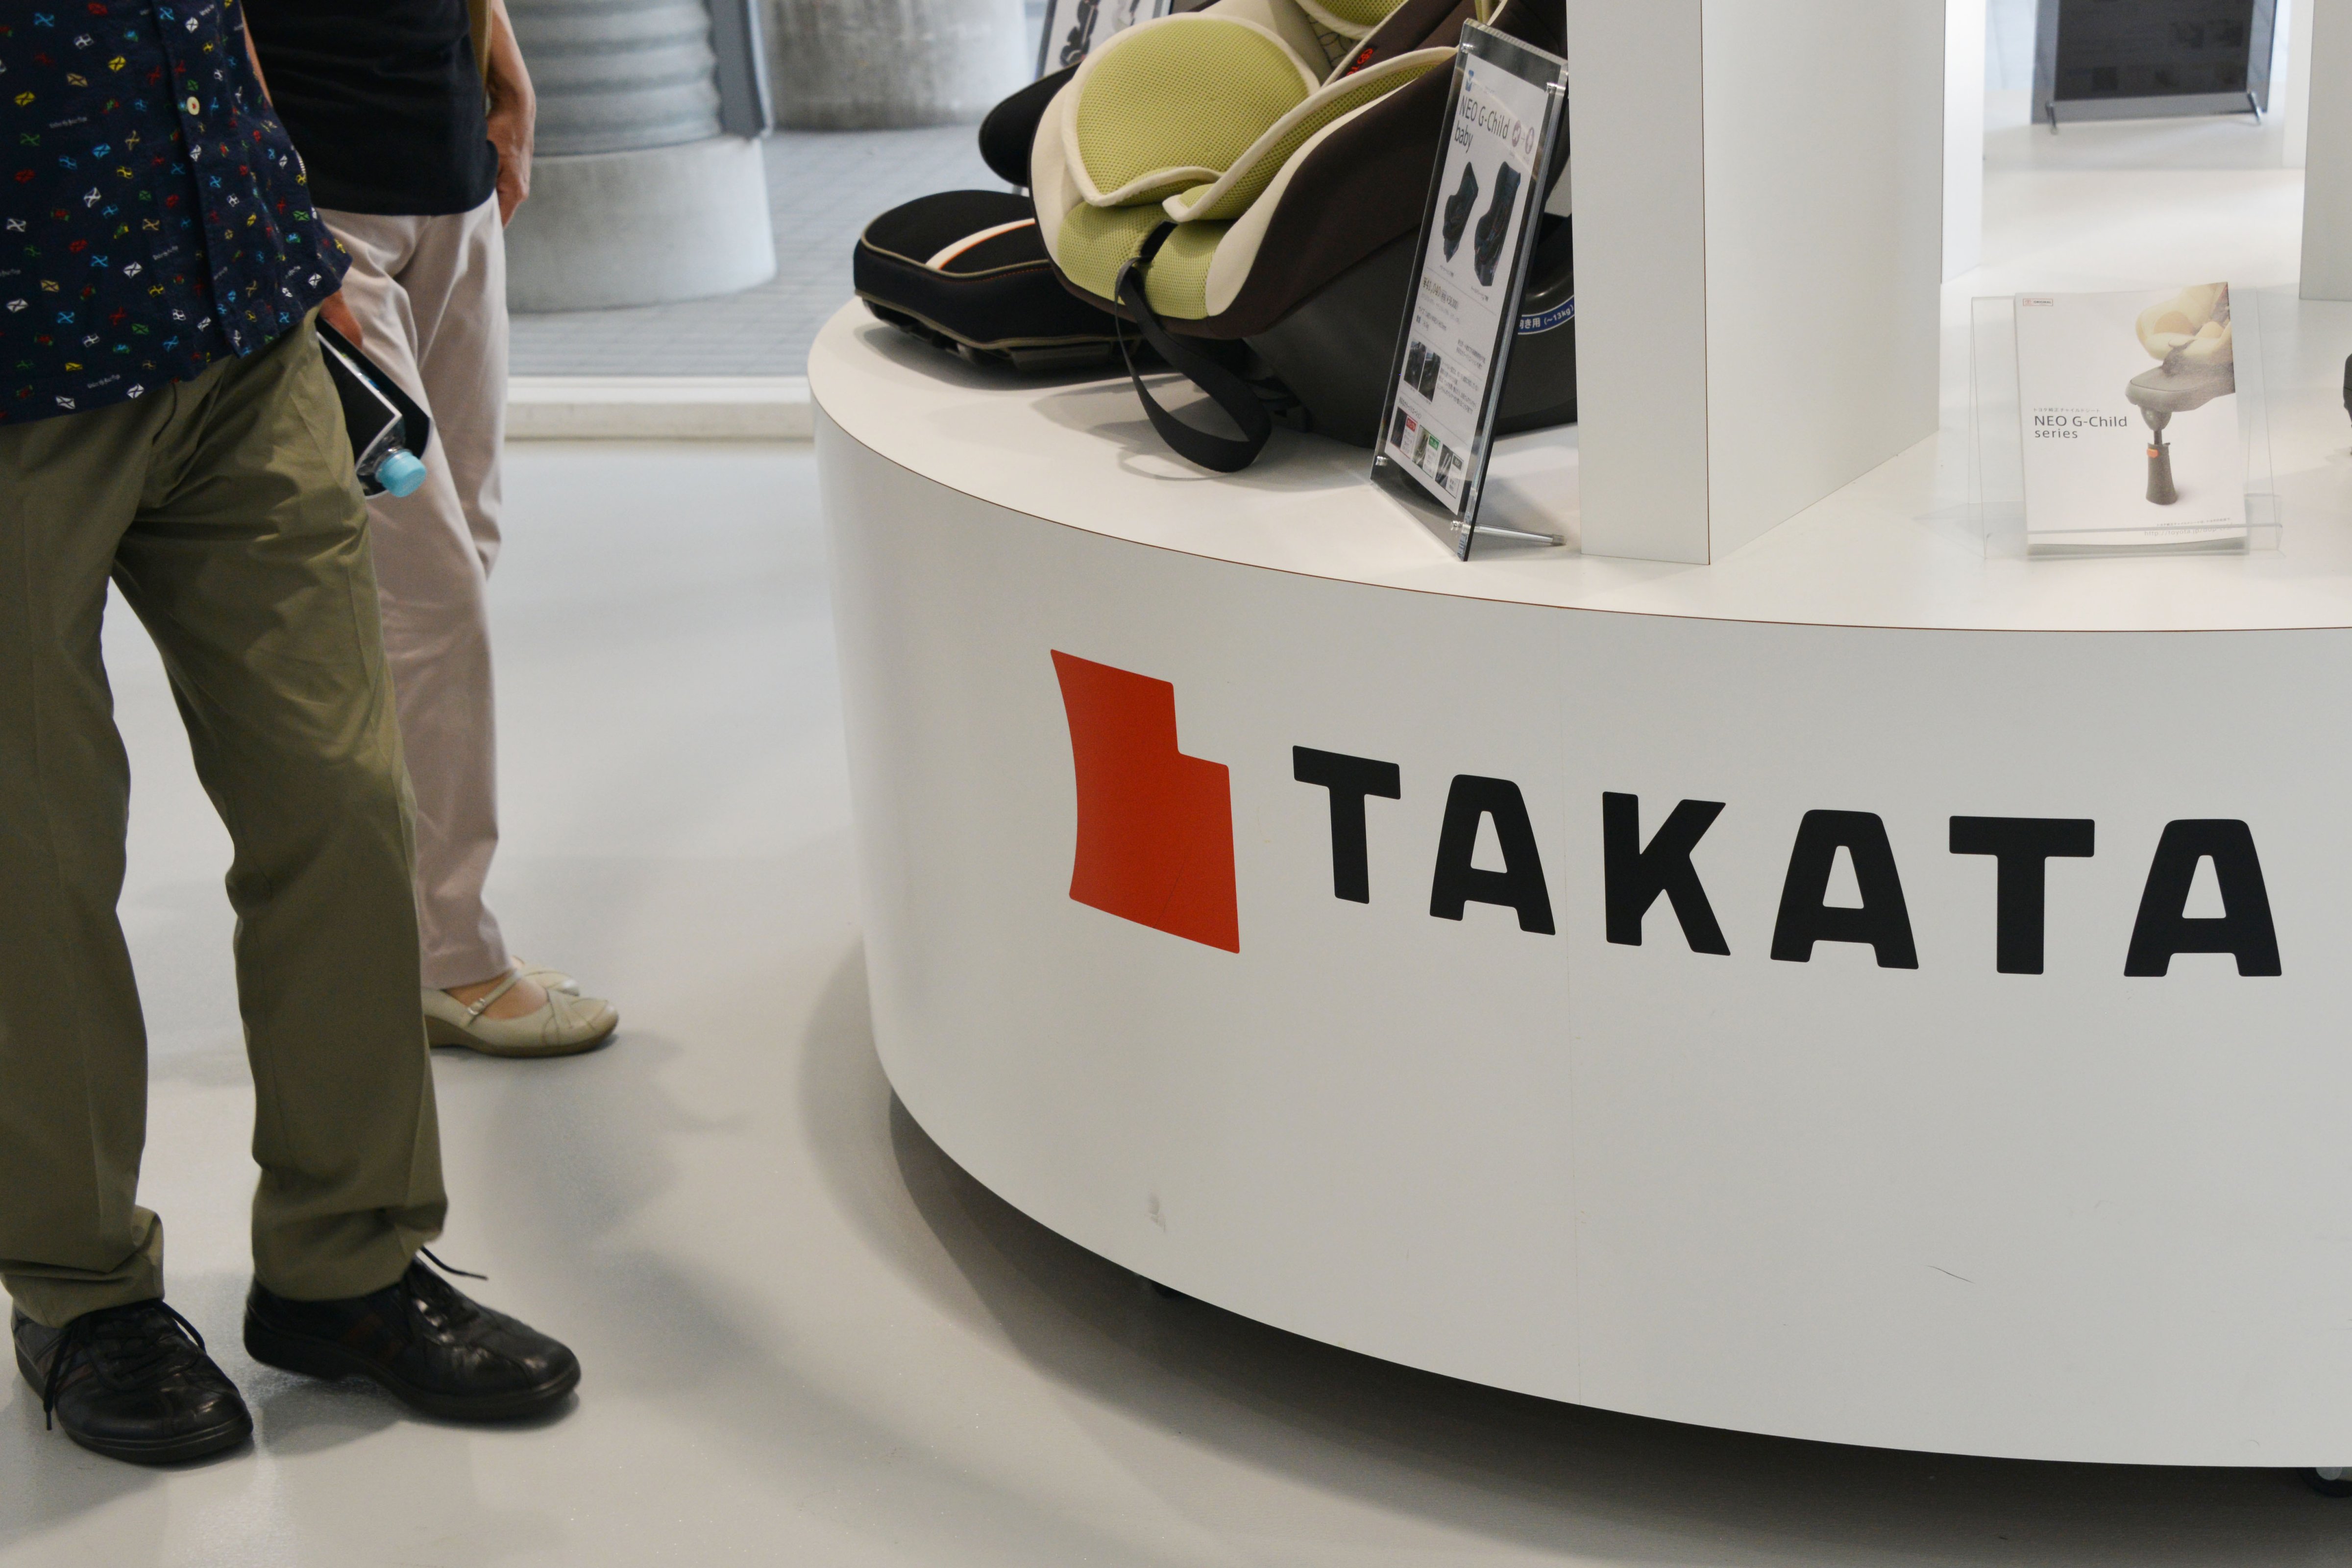 A visitor walks past displays of Takata Corp at a showroom for vehicles in Tokyo, Japan on May 20, 2015.